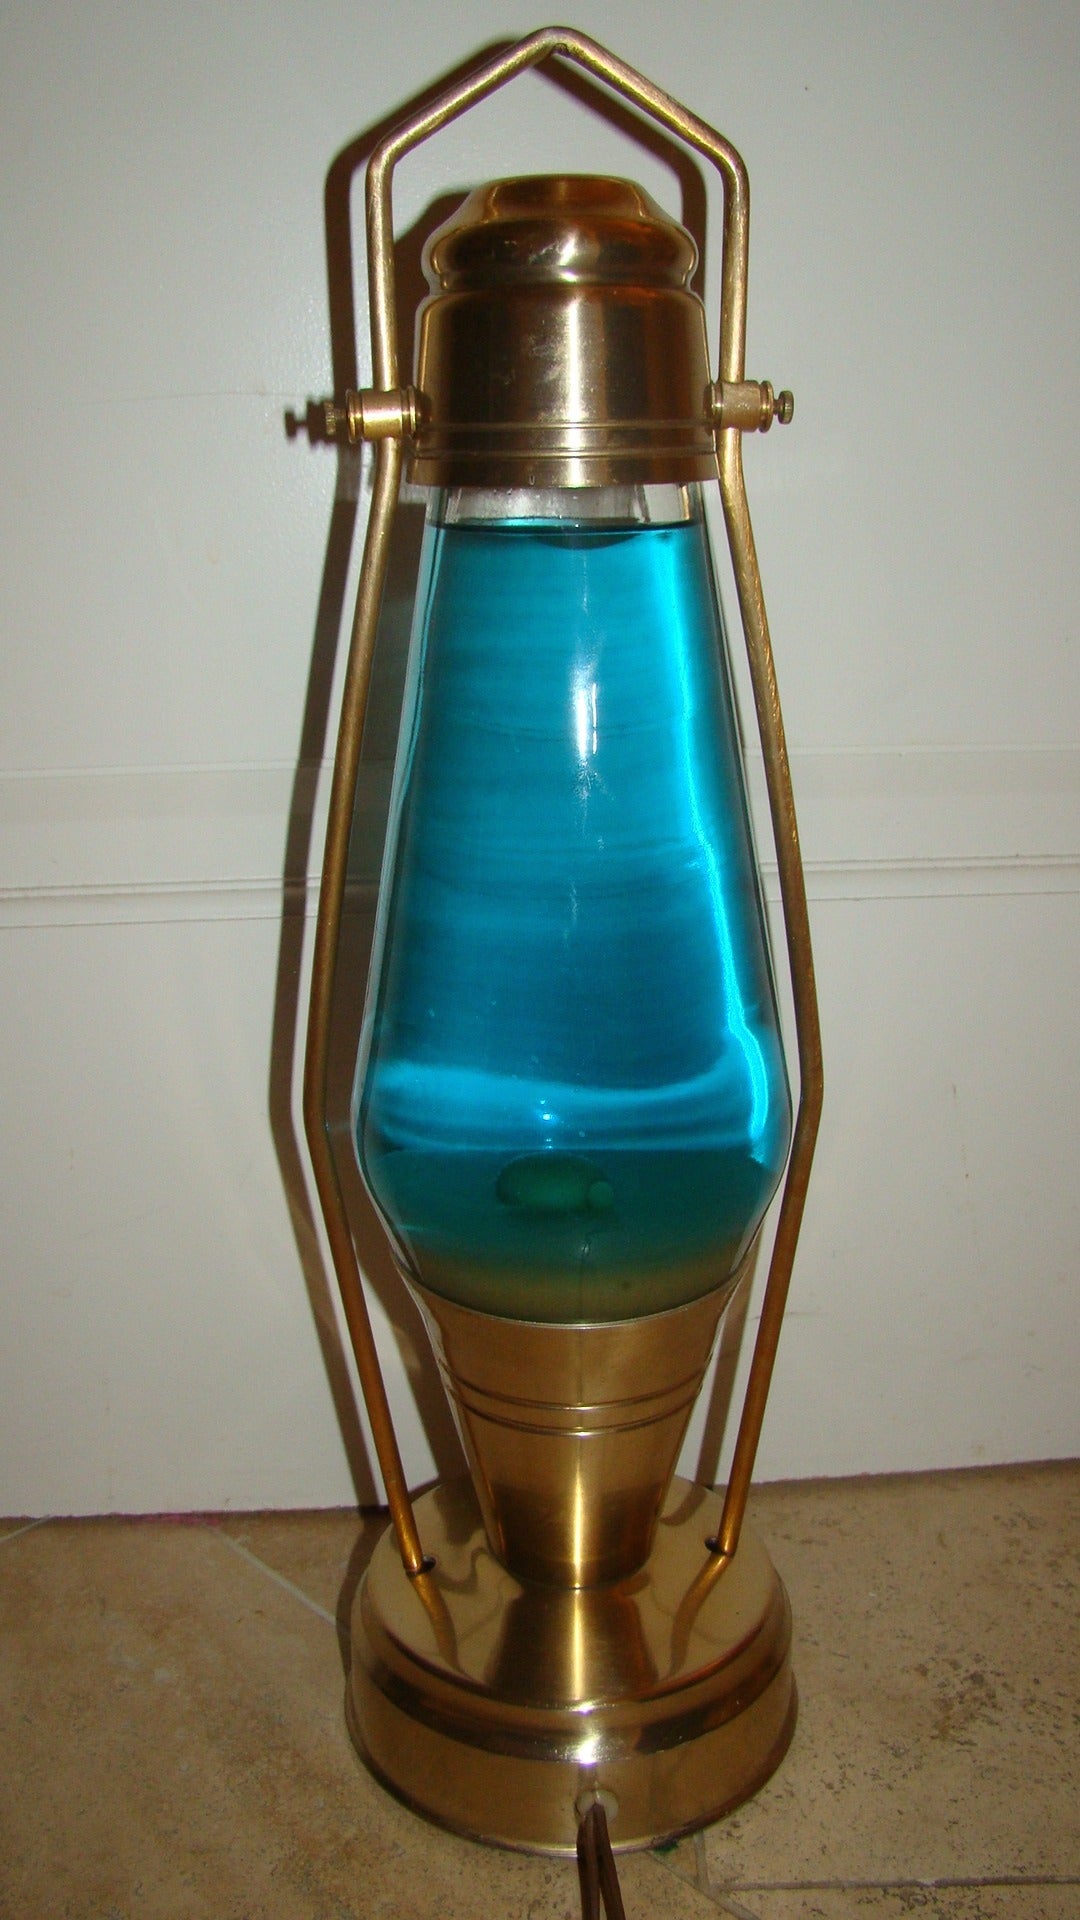 Terrific vintage coach lantern lava lamp. This interesting piece is comprised of a copper lantern style frame with blue liquid and green lava.